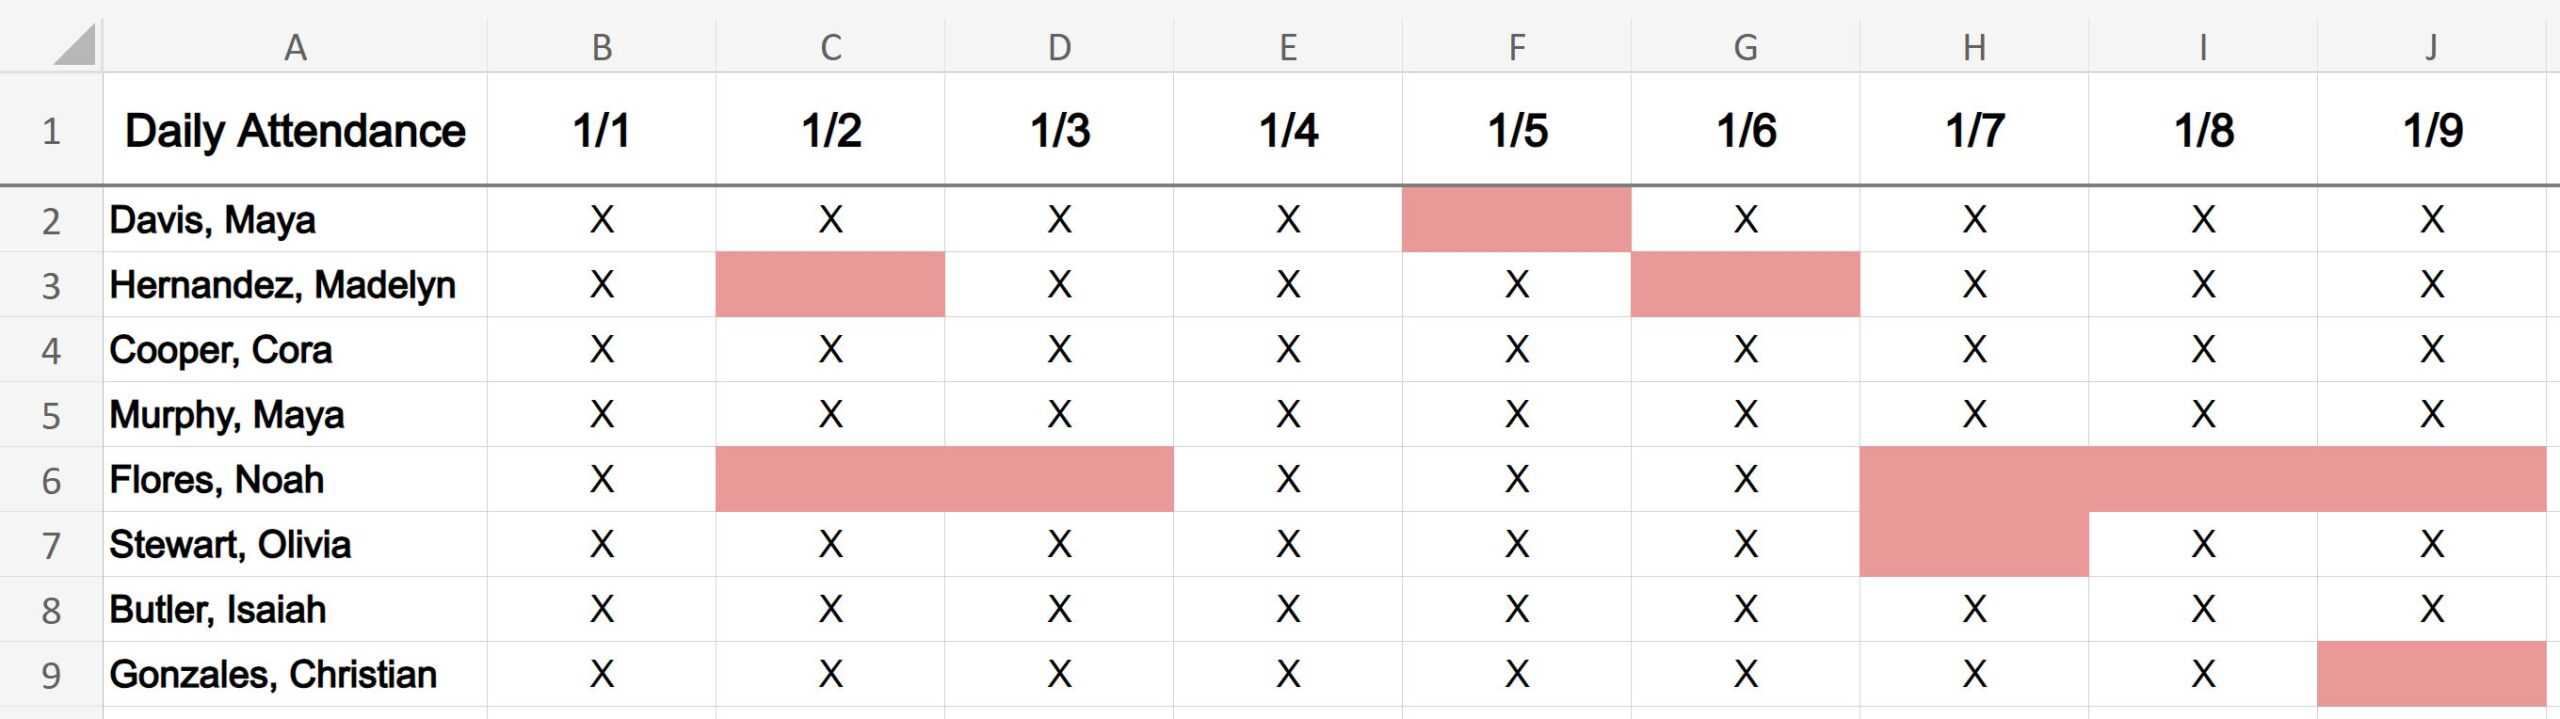 Example of How to autofit multiple columns in an Excel spreadsheet part 1- Attendance data before automatically resizing columns